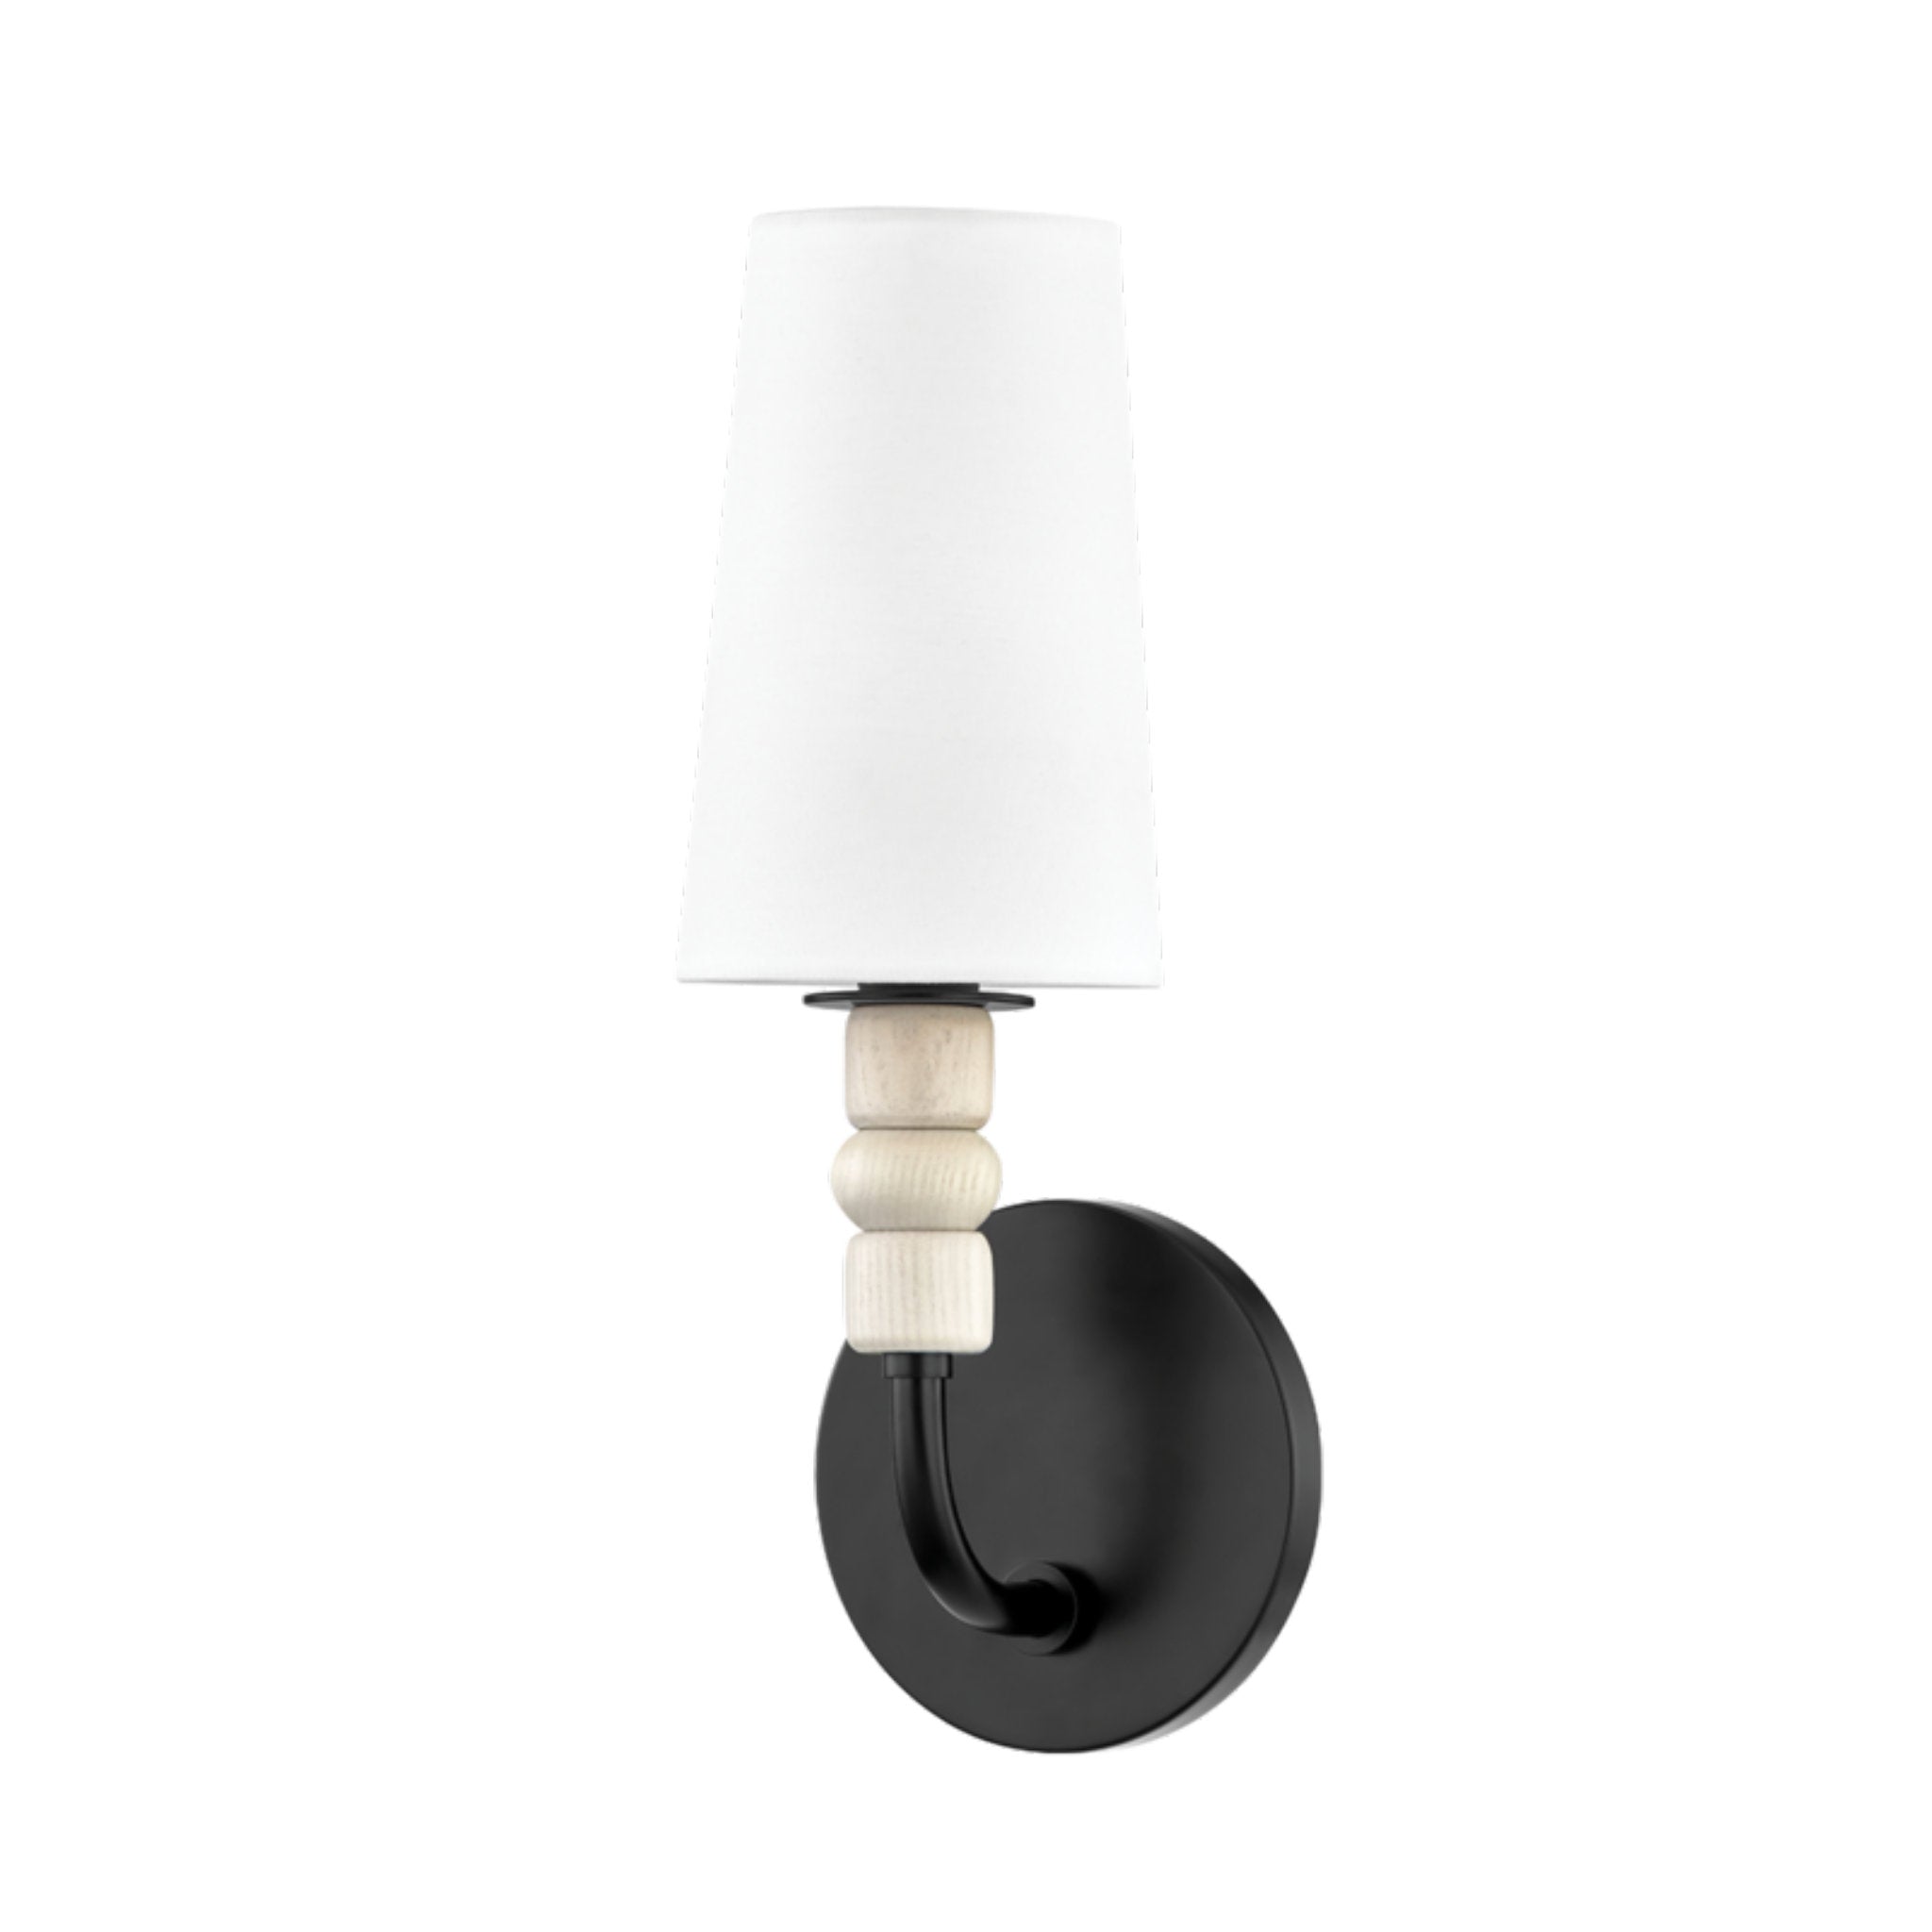 Casey 1-Light Wall Sconce in Soft Black